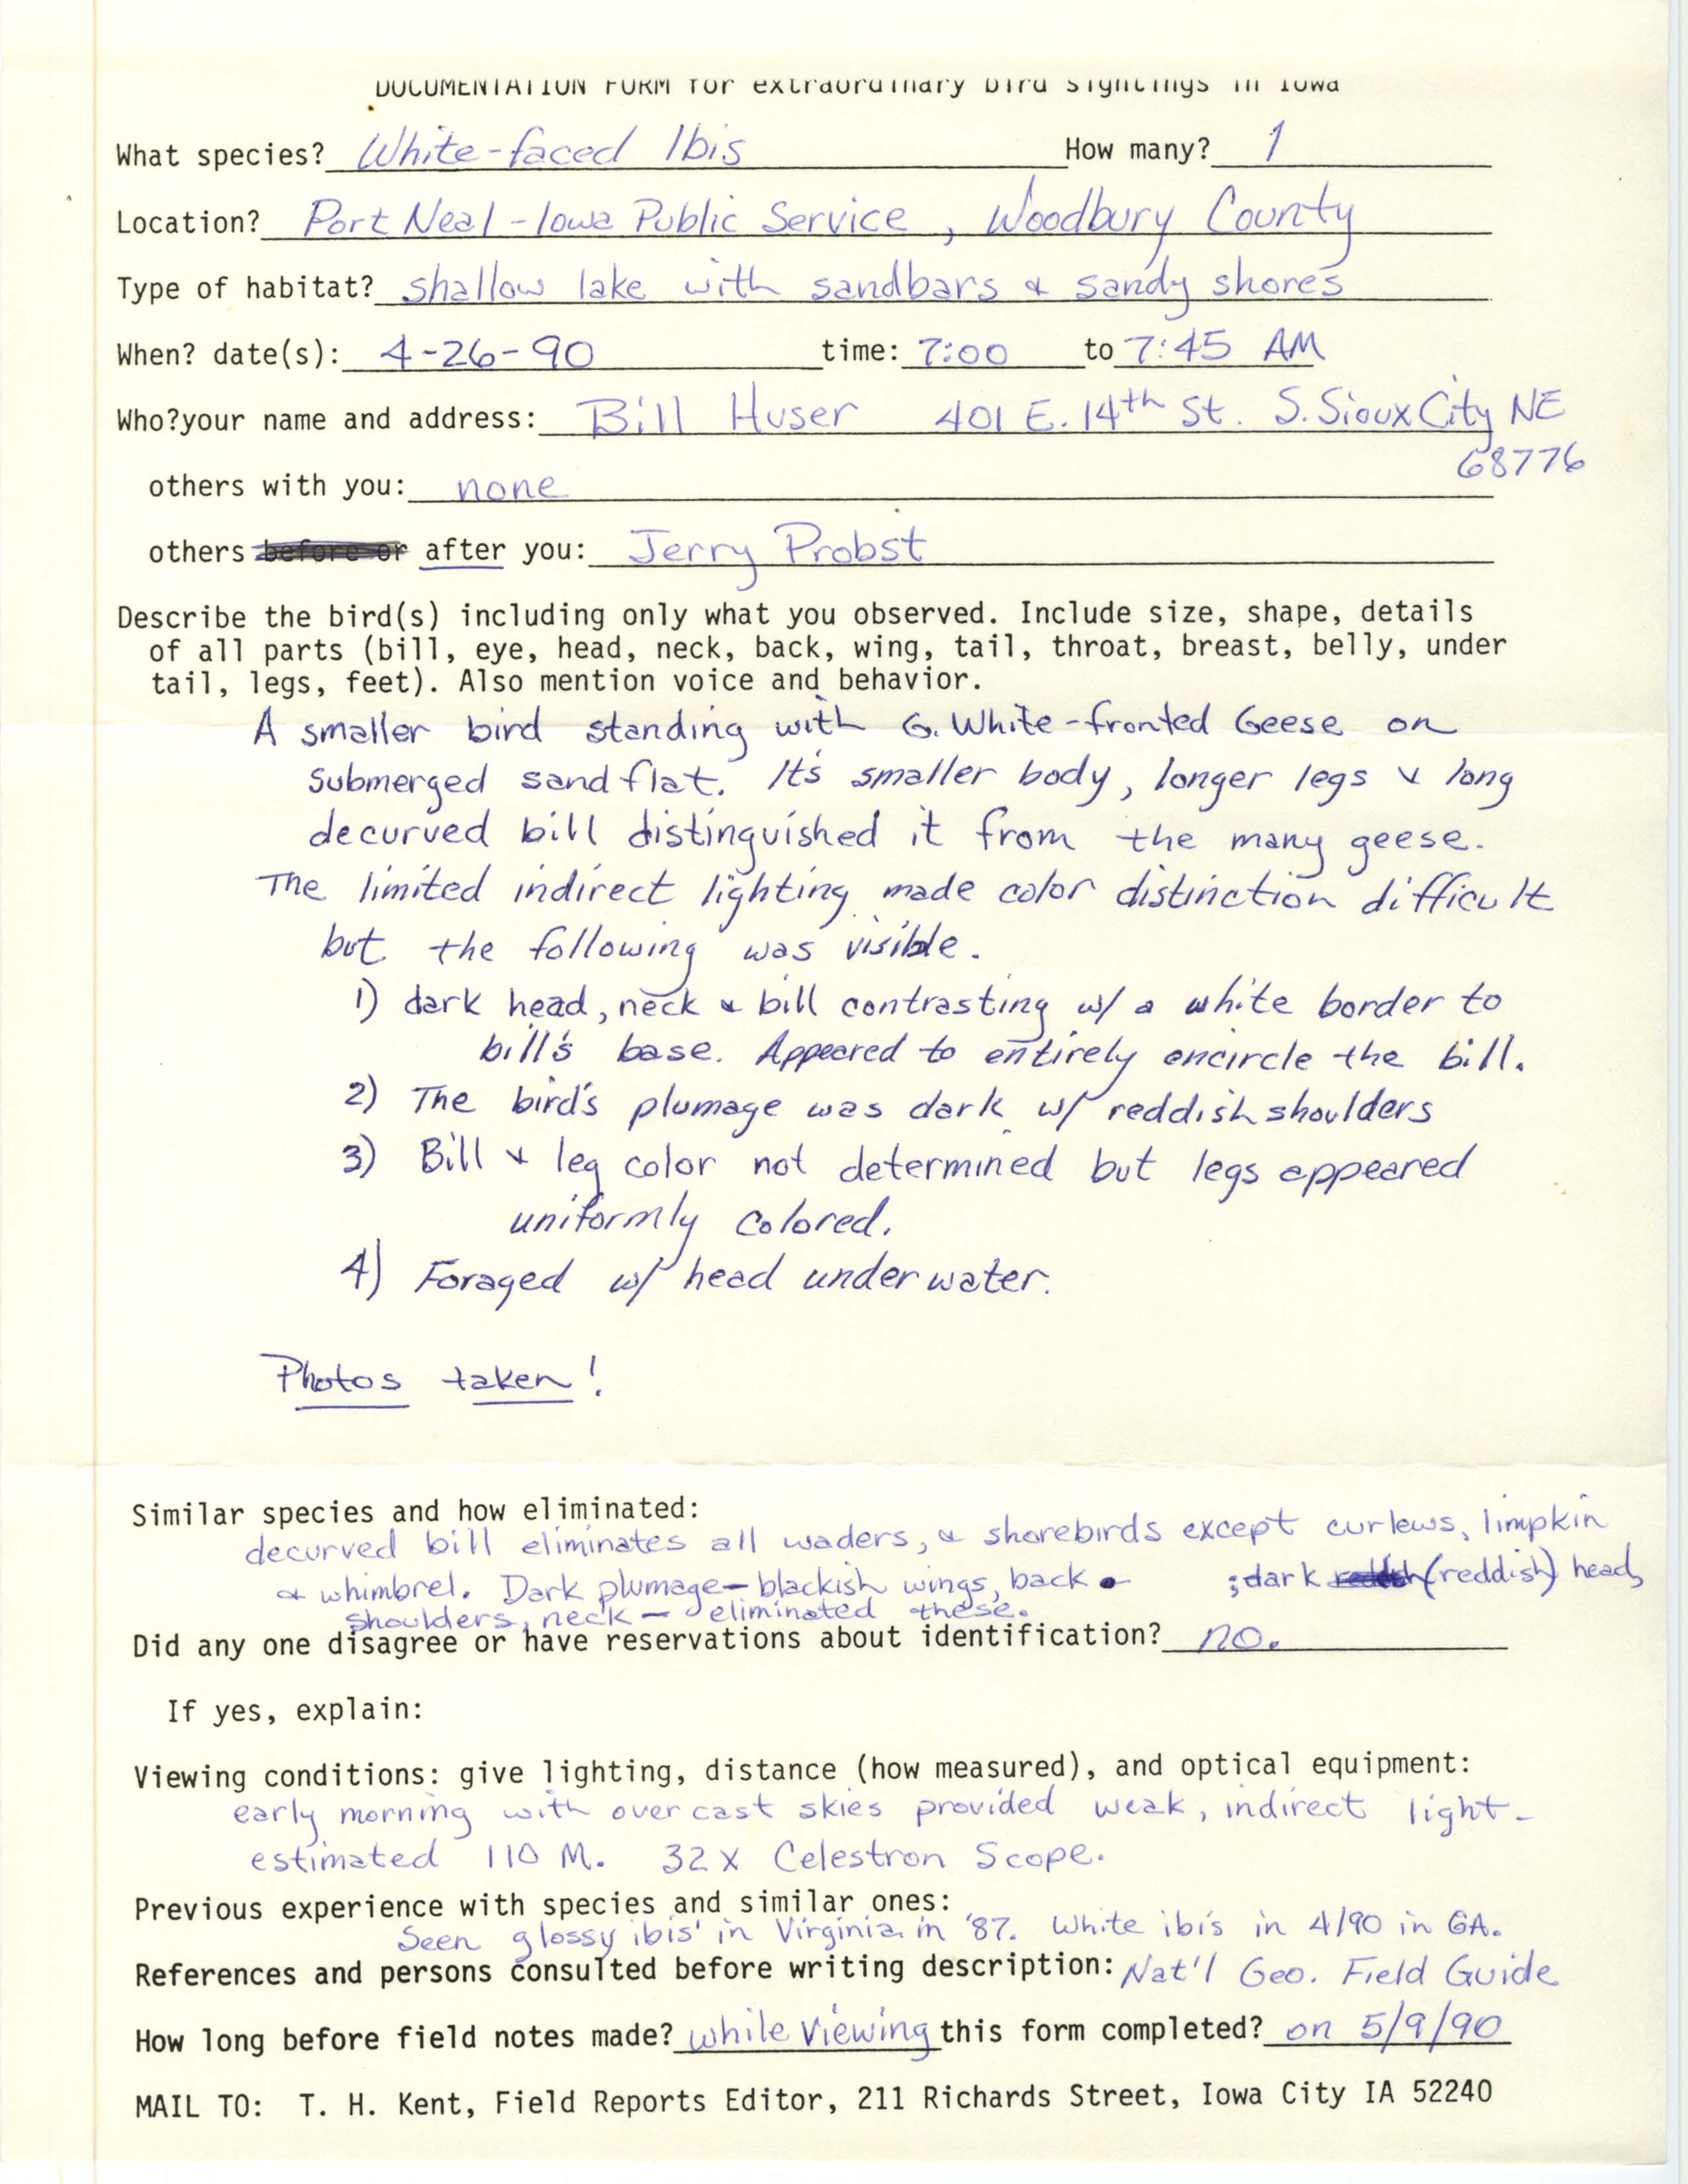 Rare bird documentation form for White-faced Ibis at Woodbury County, 1990